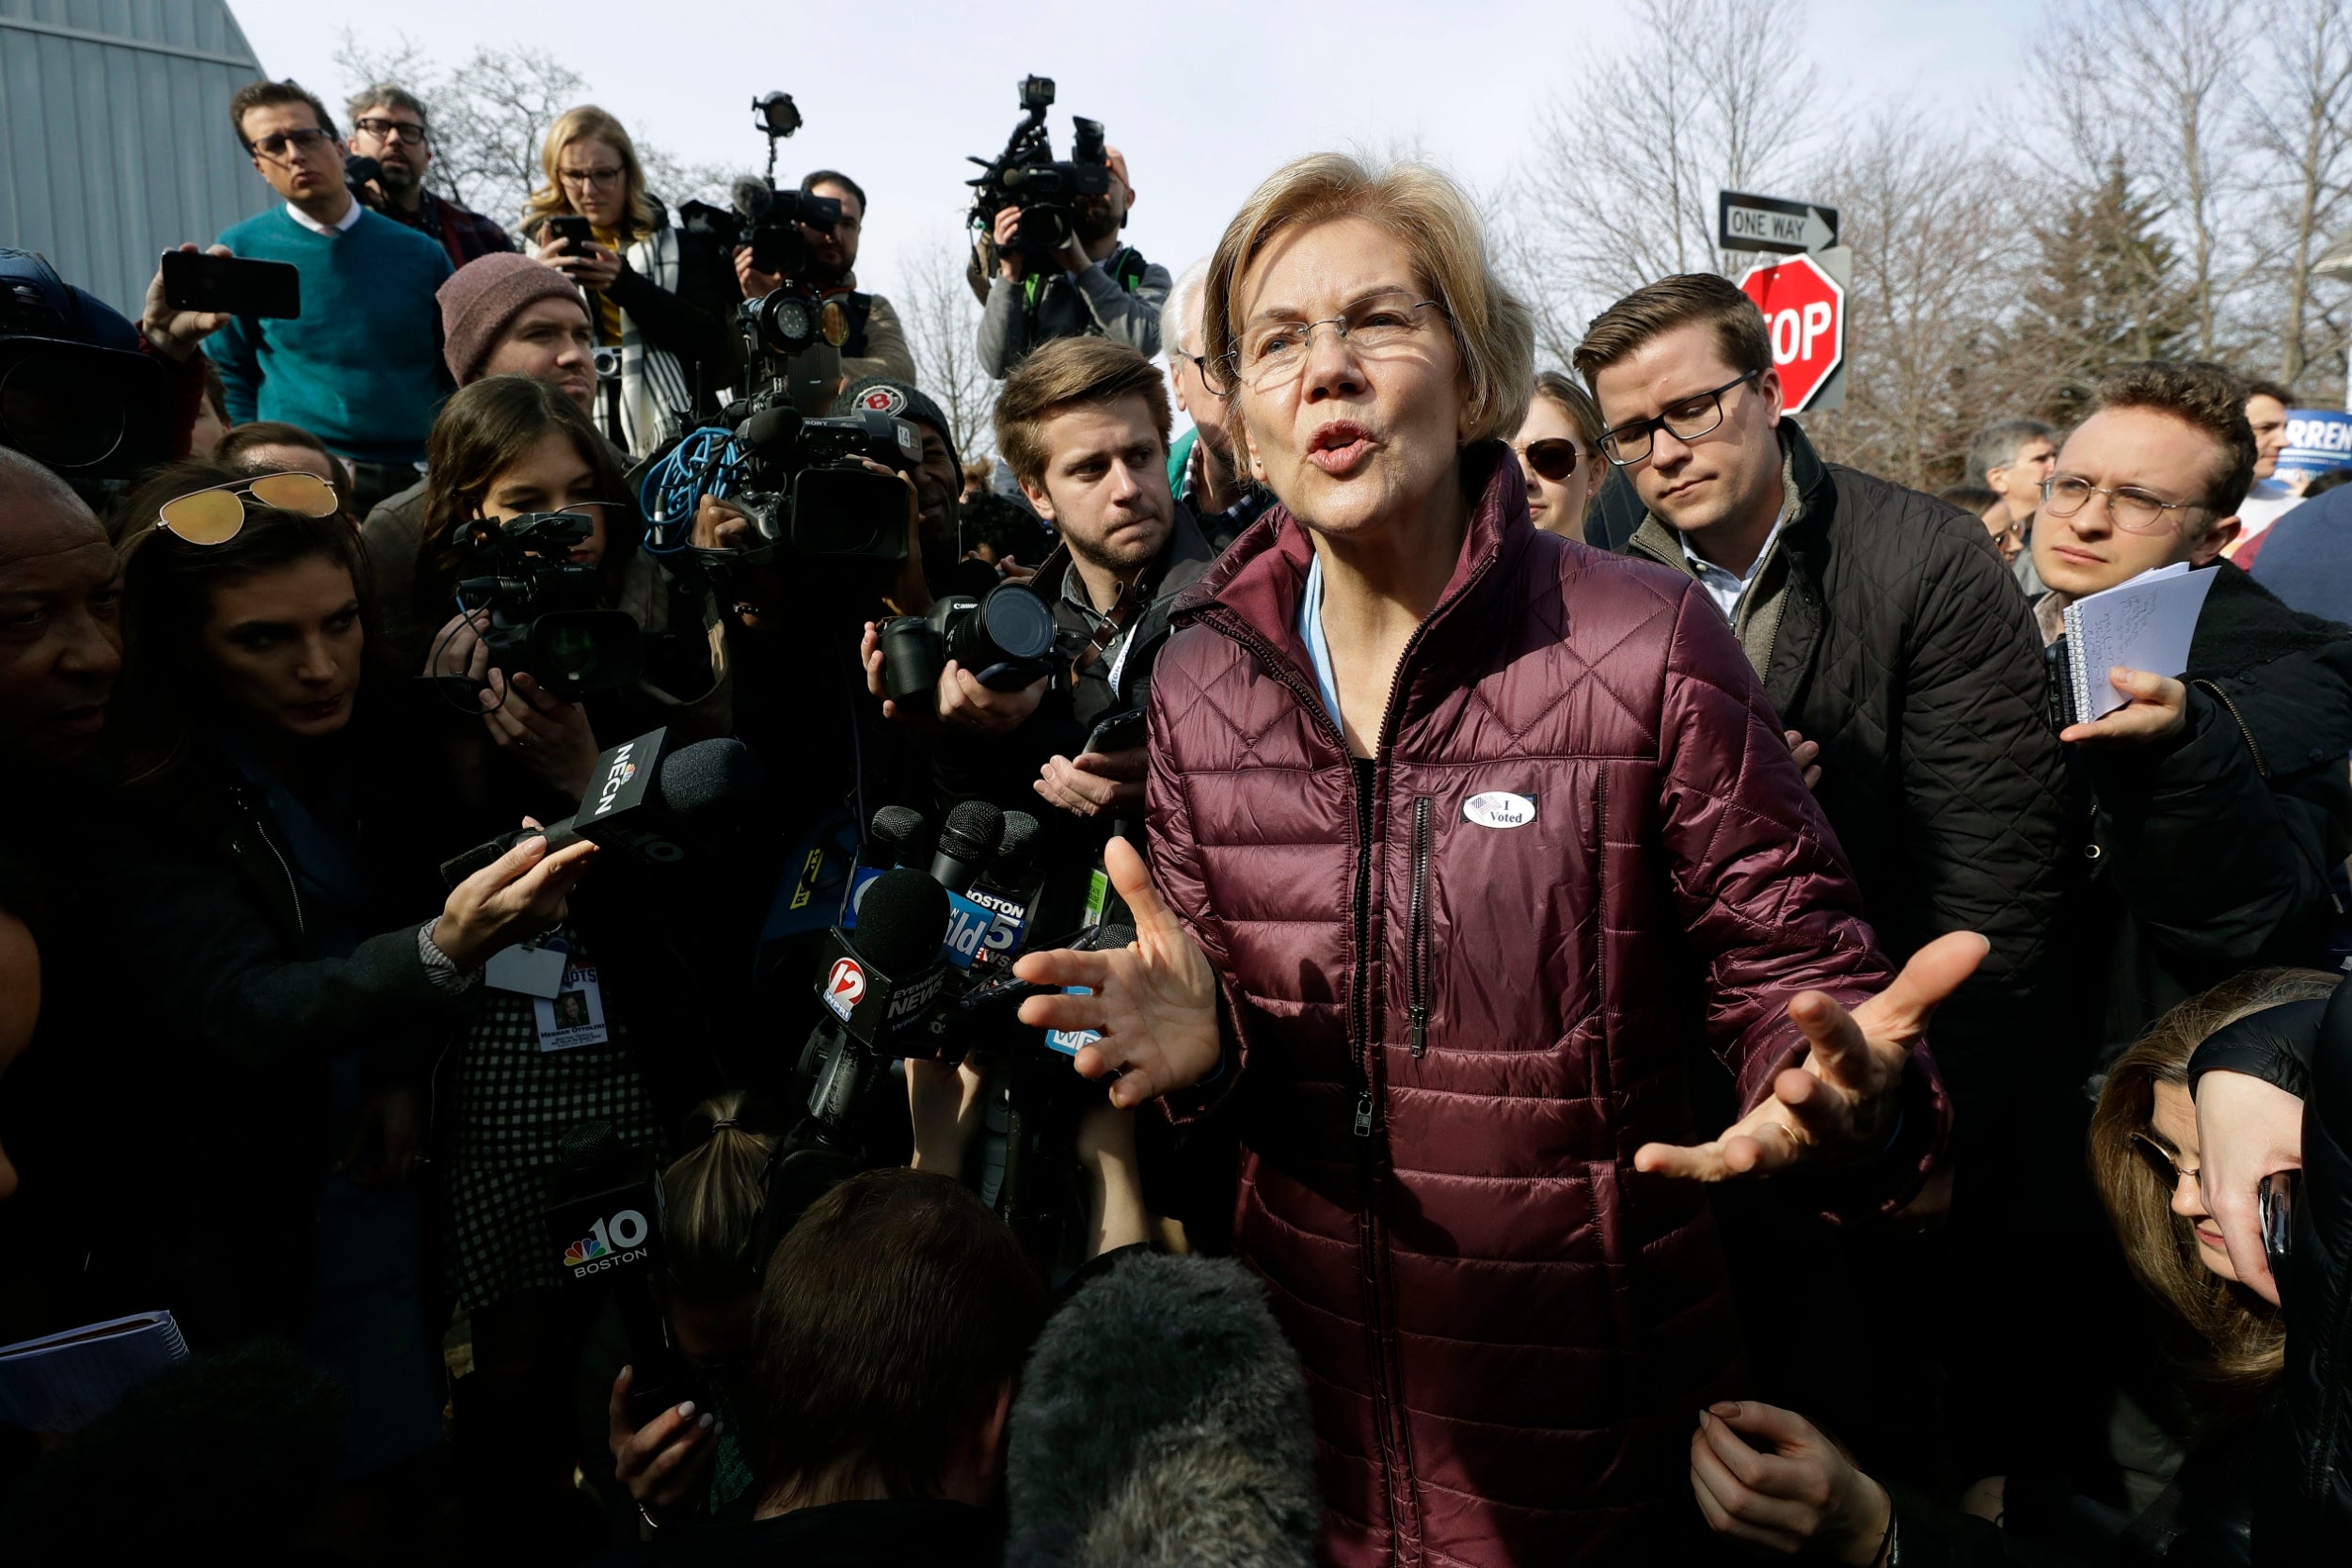 Elizabeth Warren made her name as the driving force behind regulations on Wall Street excesses